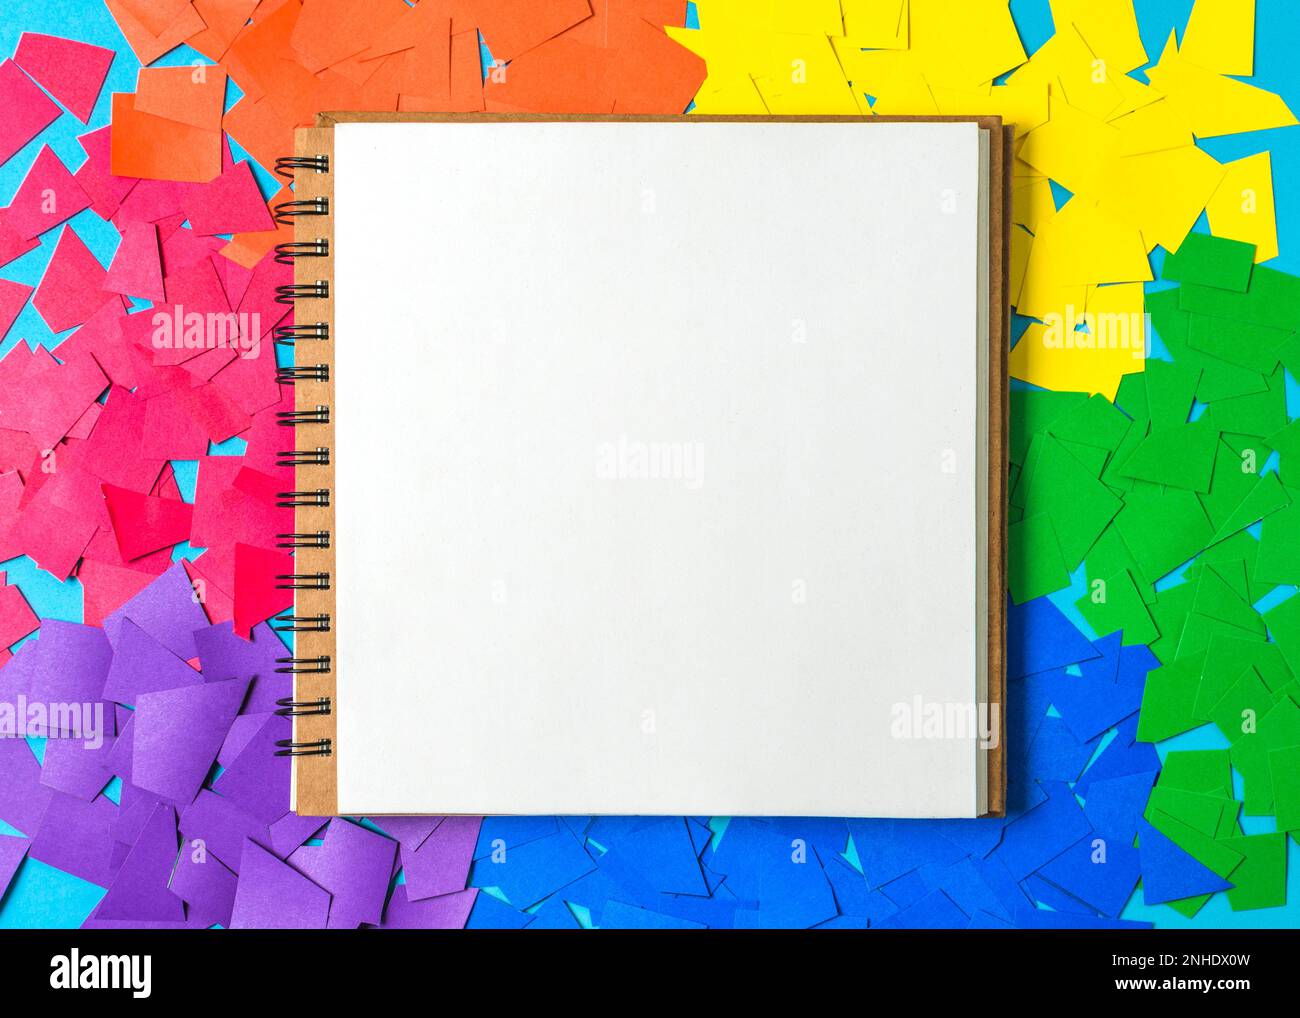 heaps paper bright lgbt colors notebook Stock Photo